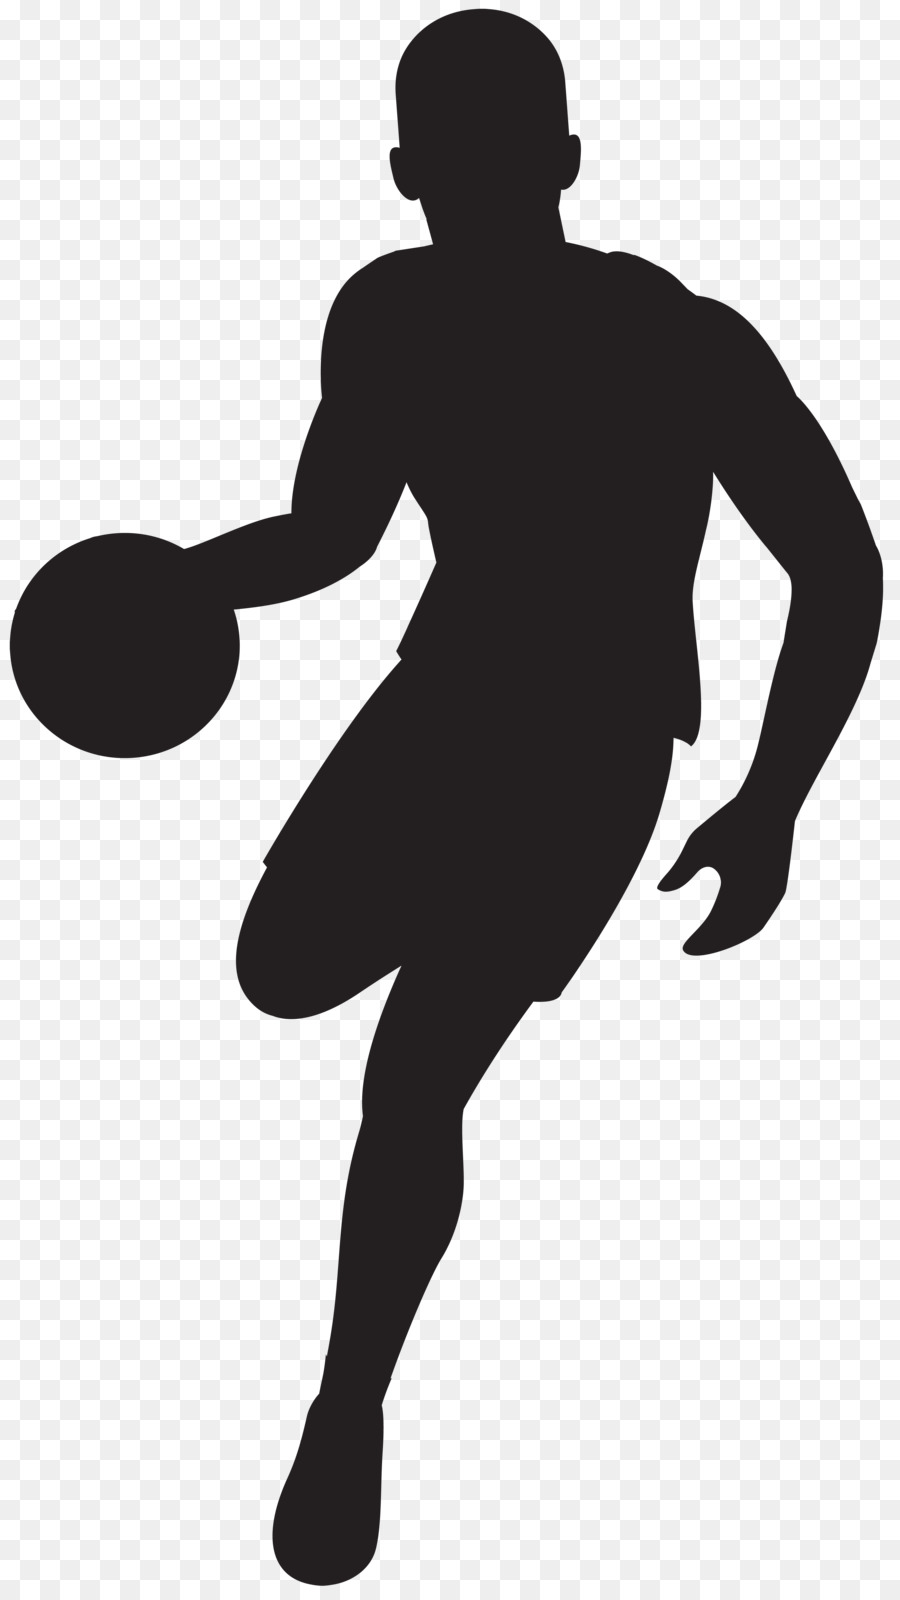 Clip art Basketball player Vector graphics - others png download - 4529*8000 - Free Transparent Basketball png Download.